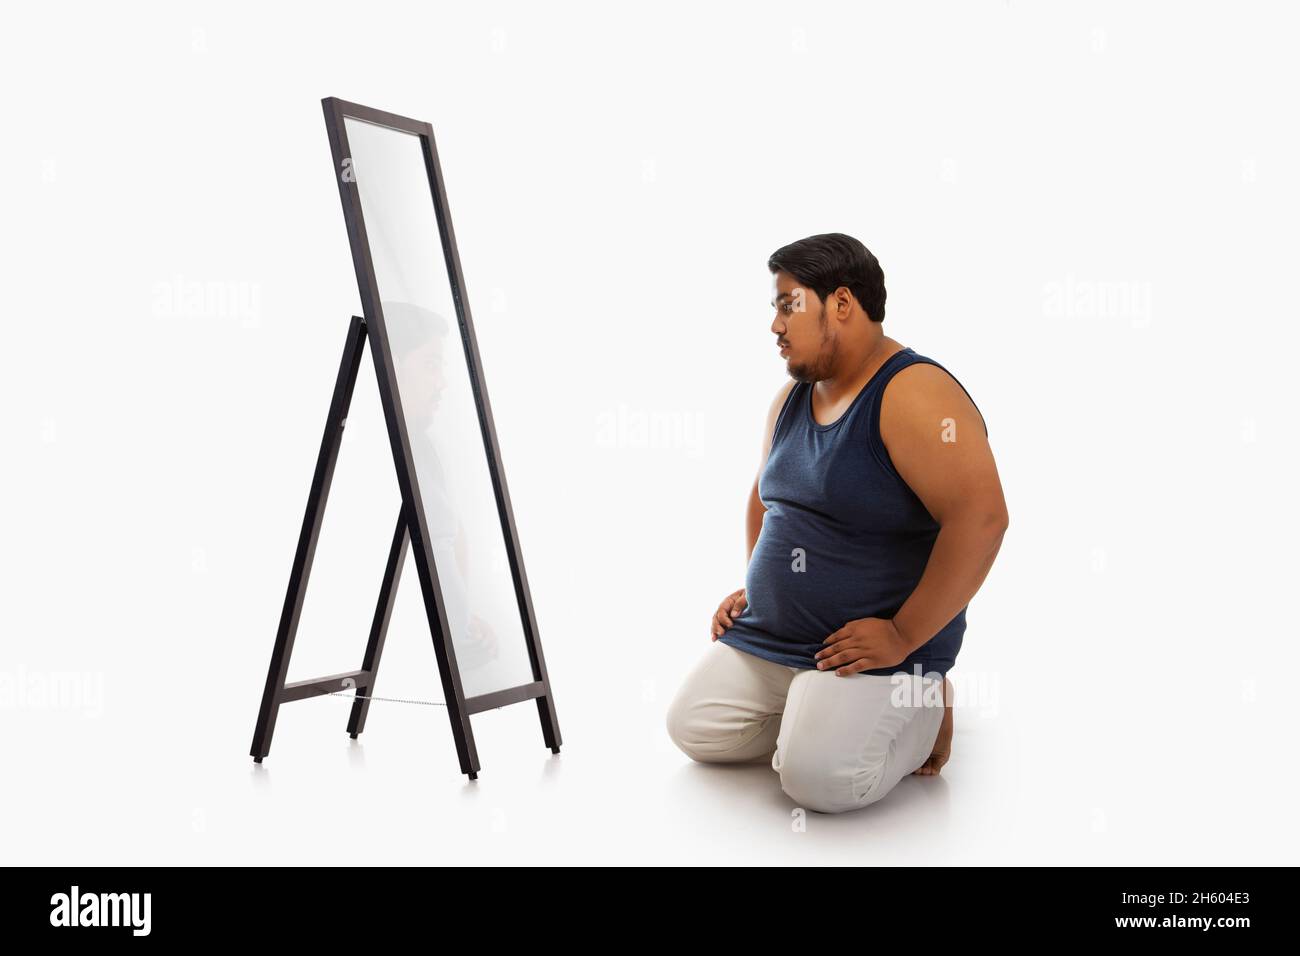 Portrait of a fat man looking at bellyfat mirror in despair against plain background. Stock Photo